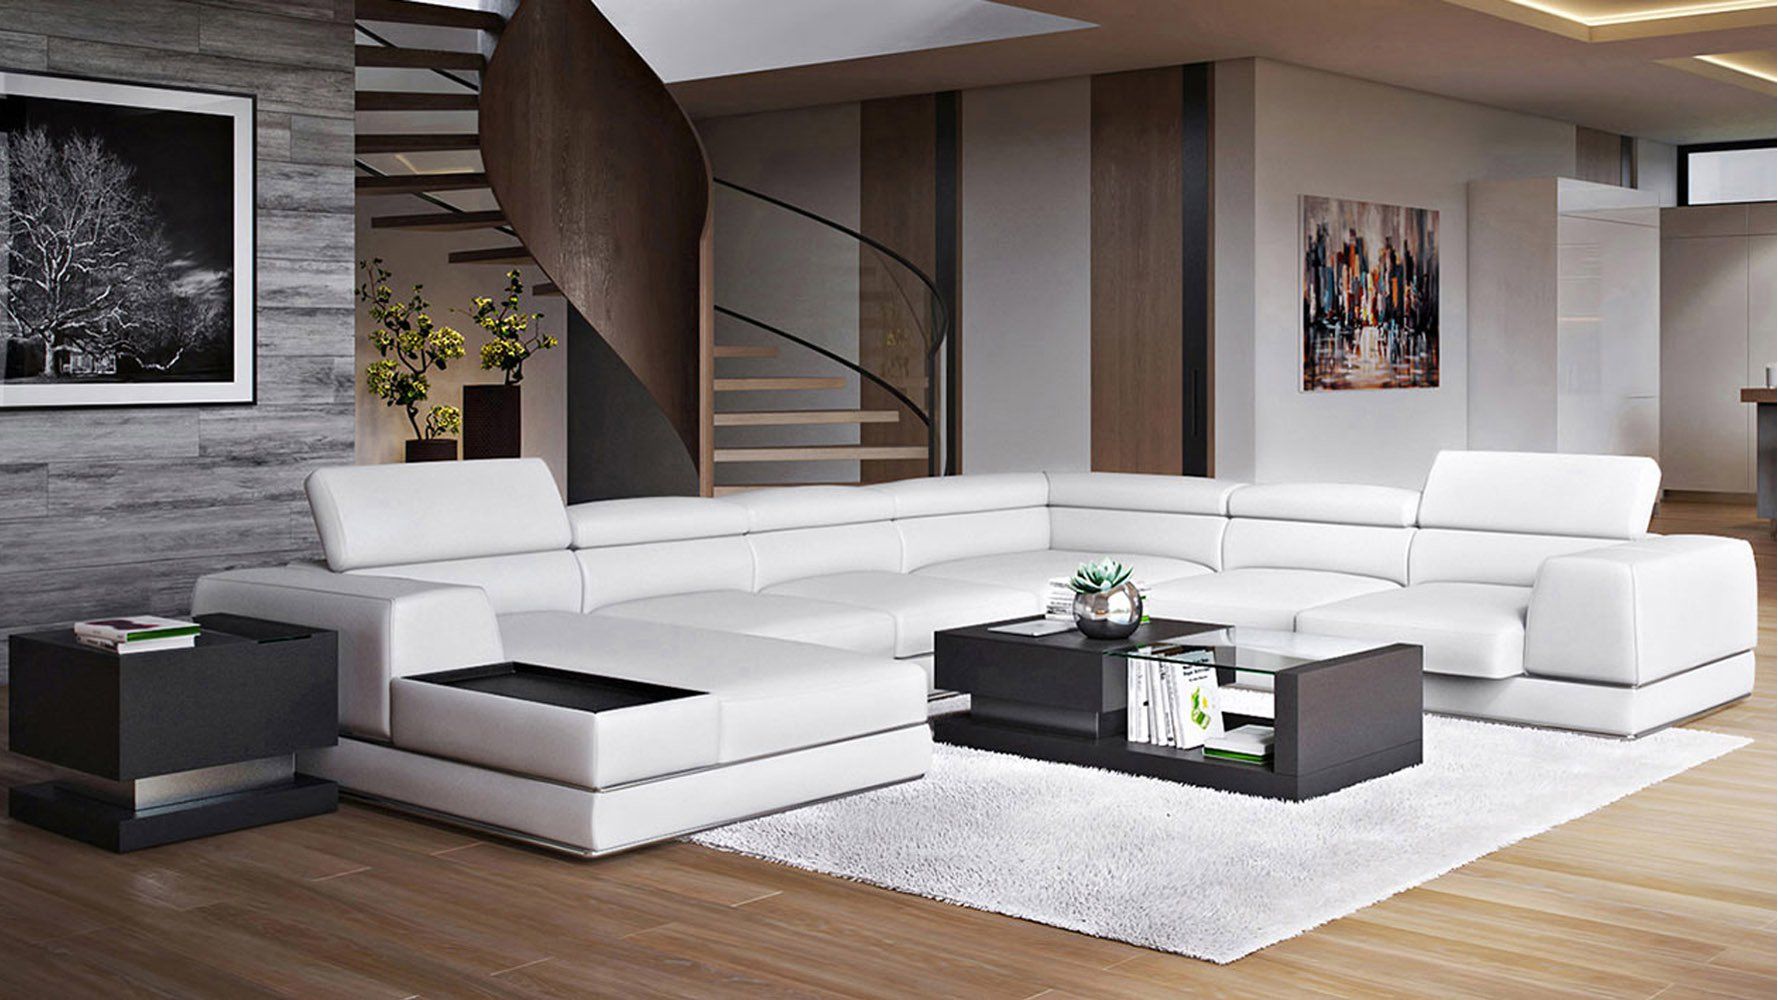 Stylish and Chic: White Leather Sectional Sofa Decorating Ideas to Elevate Your Living Space